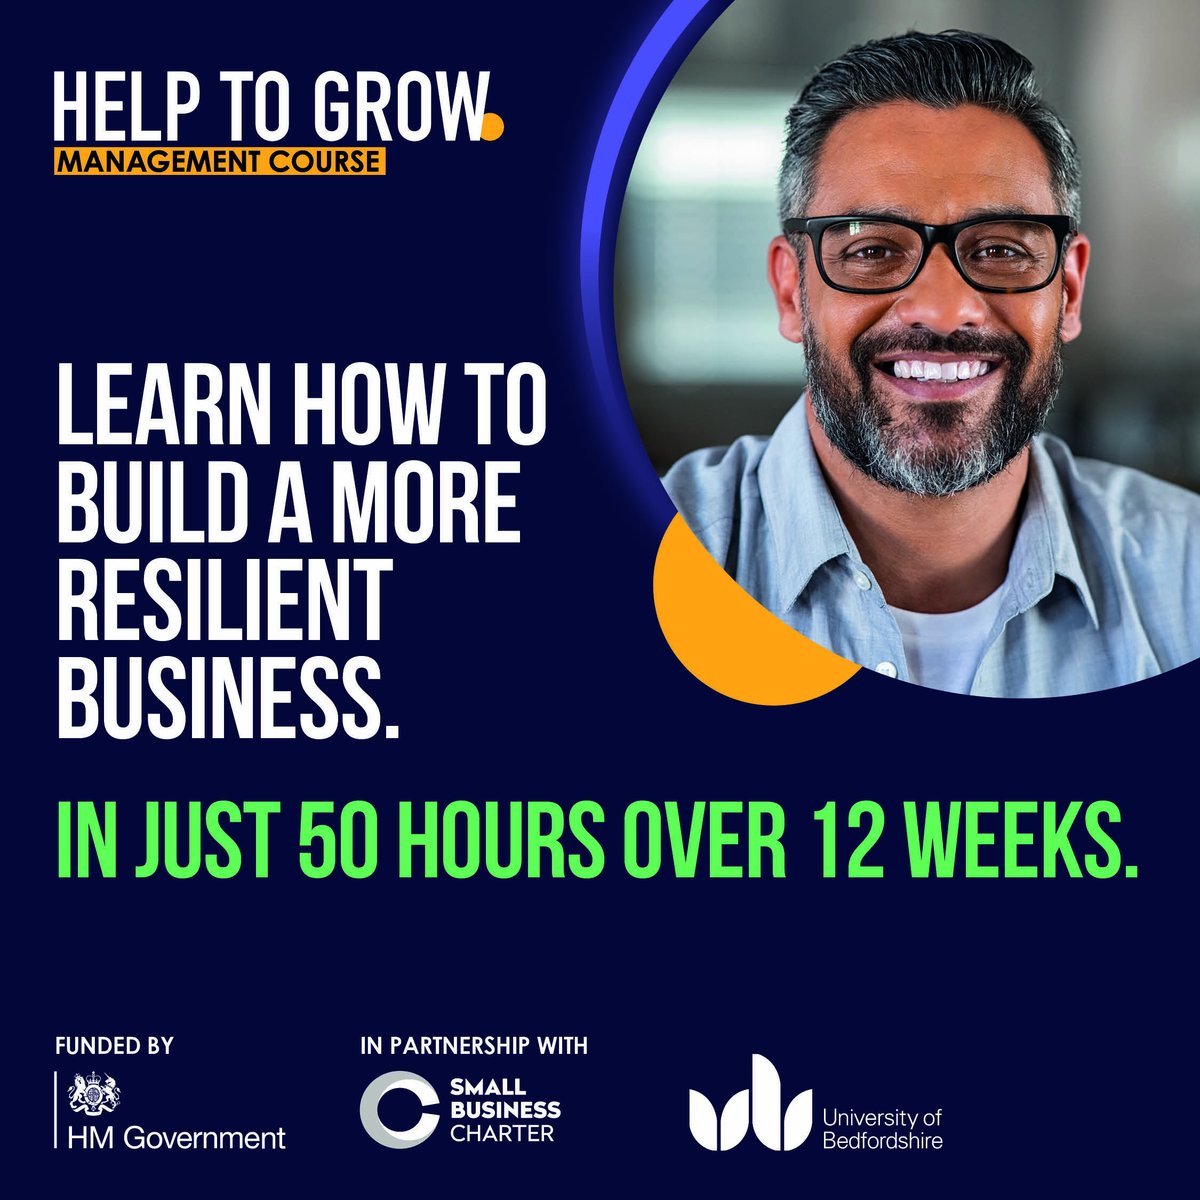 Business leaders in #BeCentralBeds
Create a bespoke growth plan for your #CBedsBusiness to help it reach its full potential. Join the 90% government-funded #HelpToGrowManagement Course.
📲Register today: ow.ly/UA8e50PsJRo
@fsbbedcambhert @allthingsbus 
#BrandGrowth